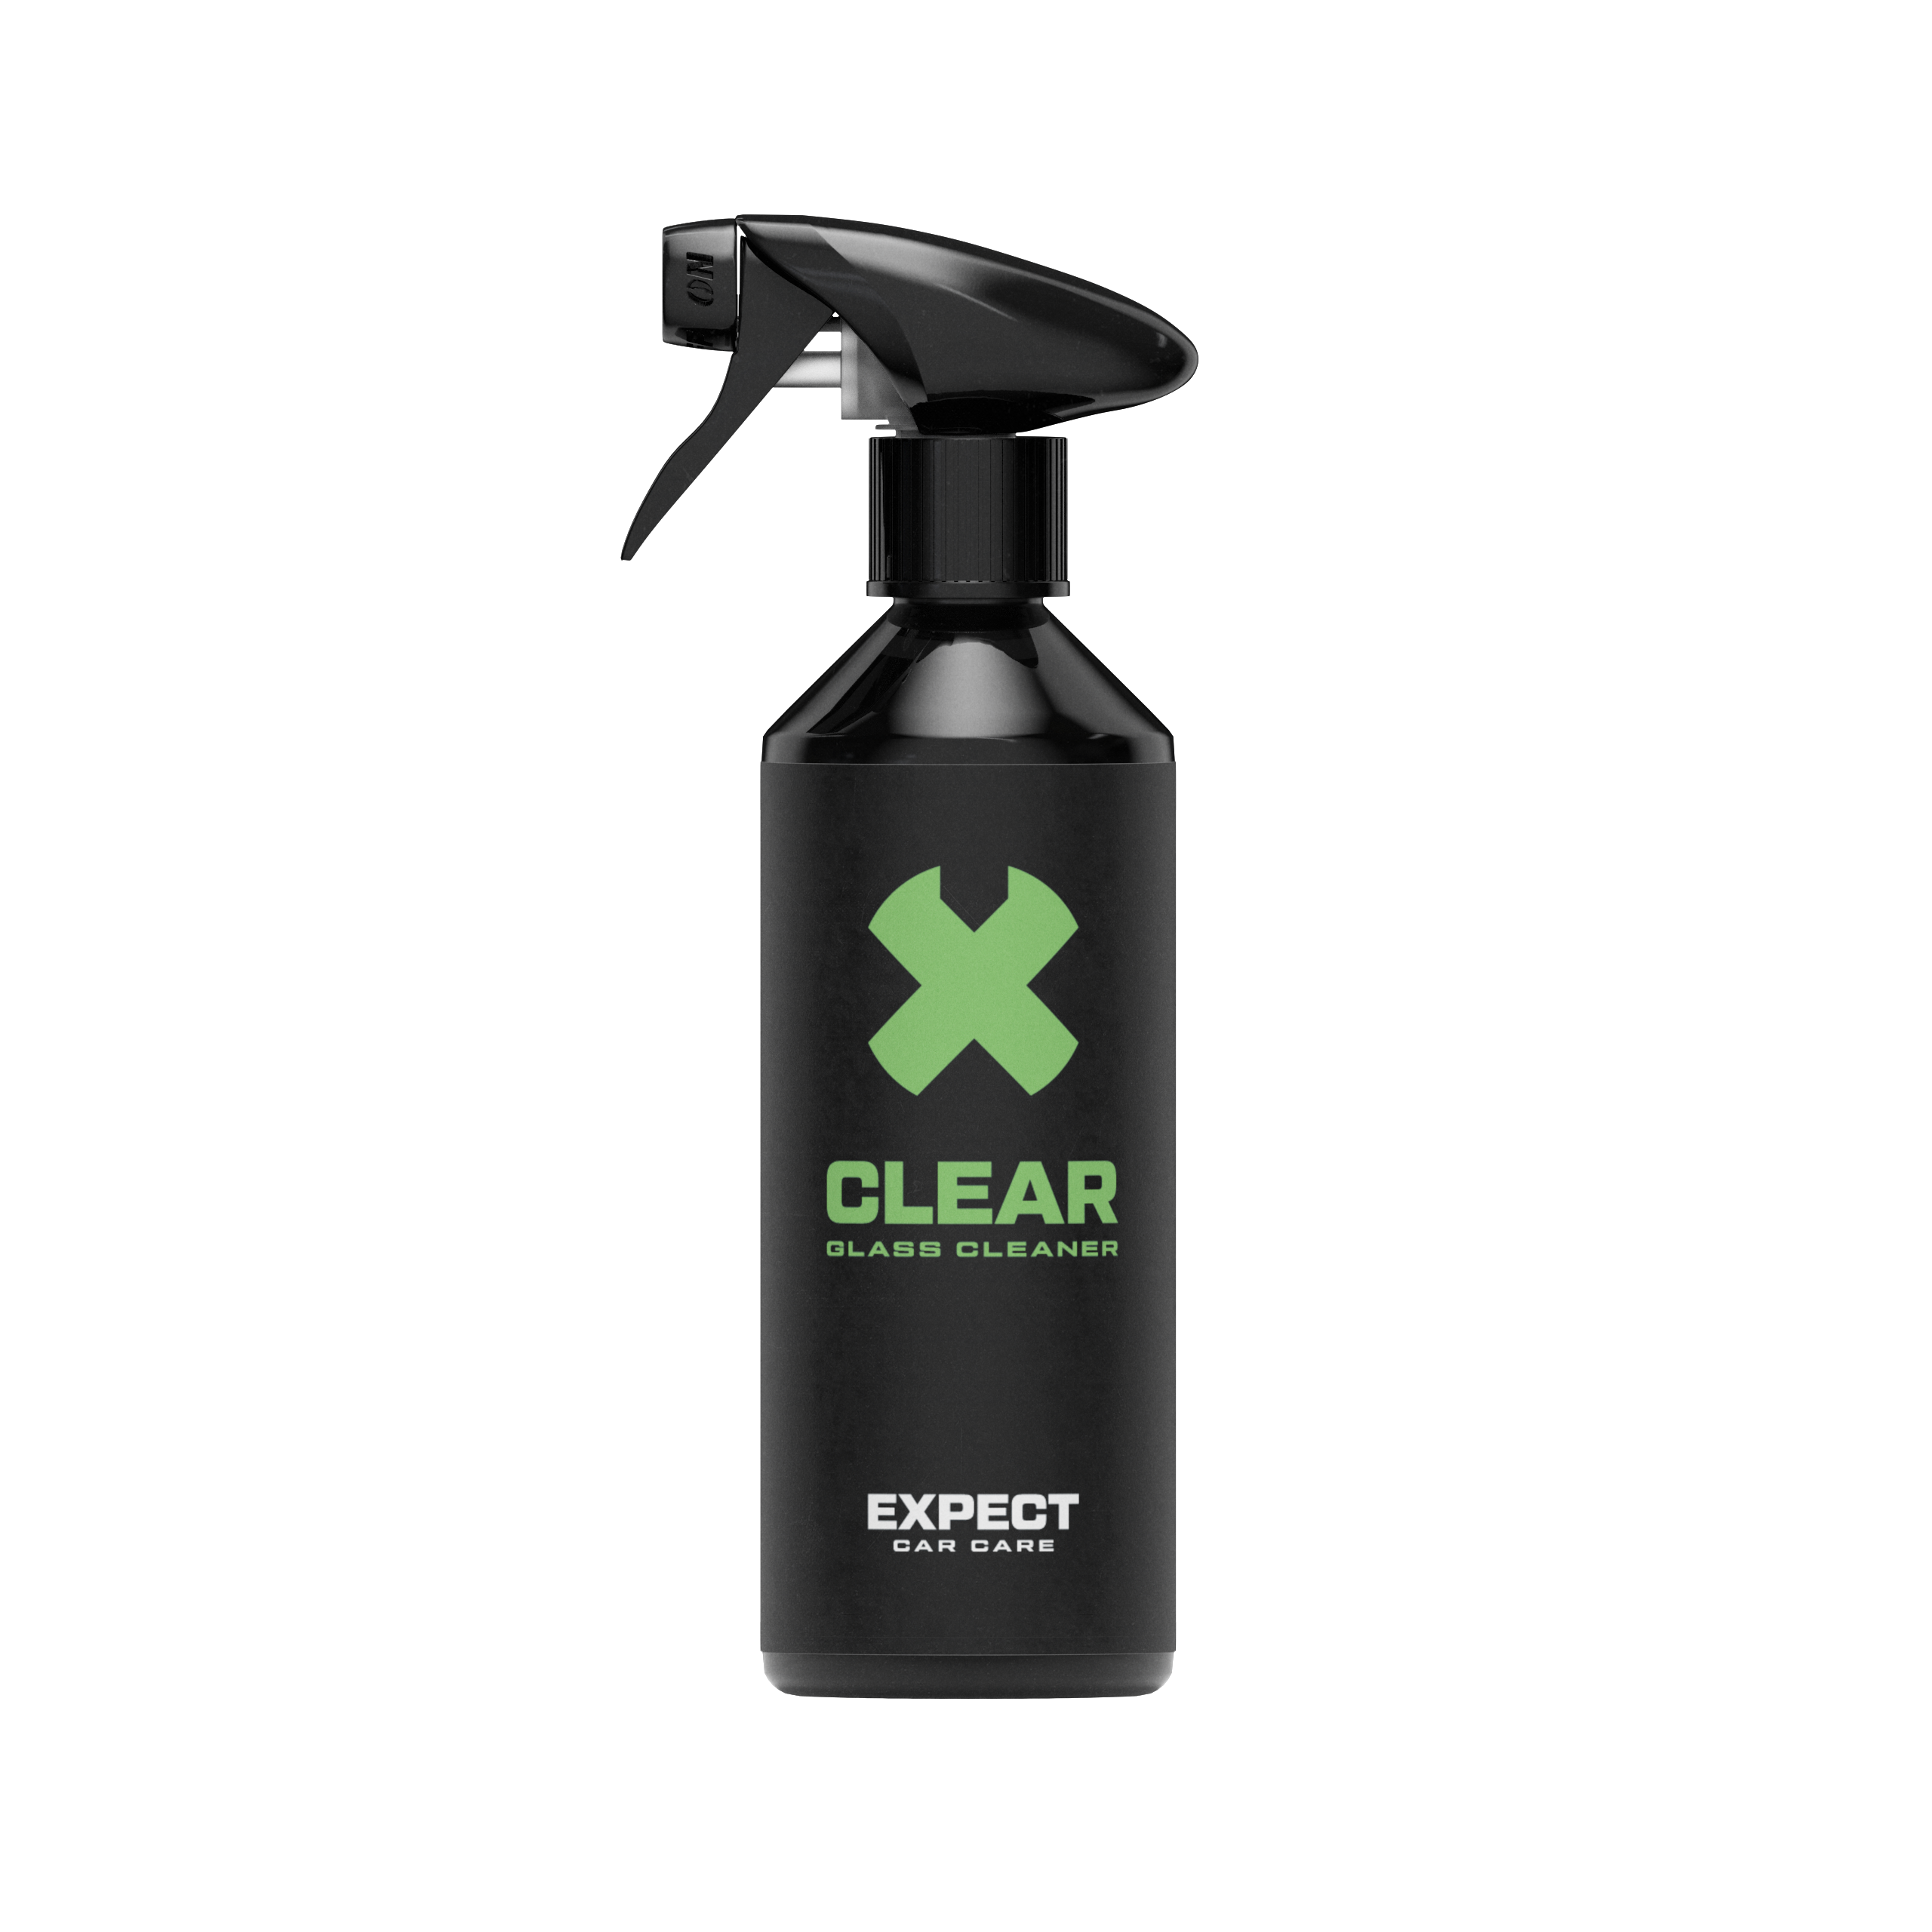 Clear Glass Cleaner